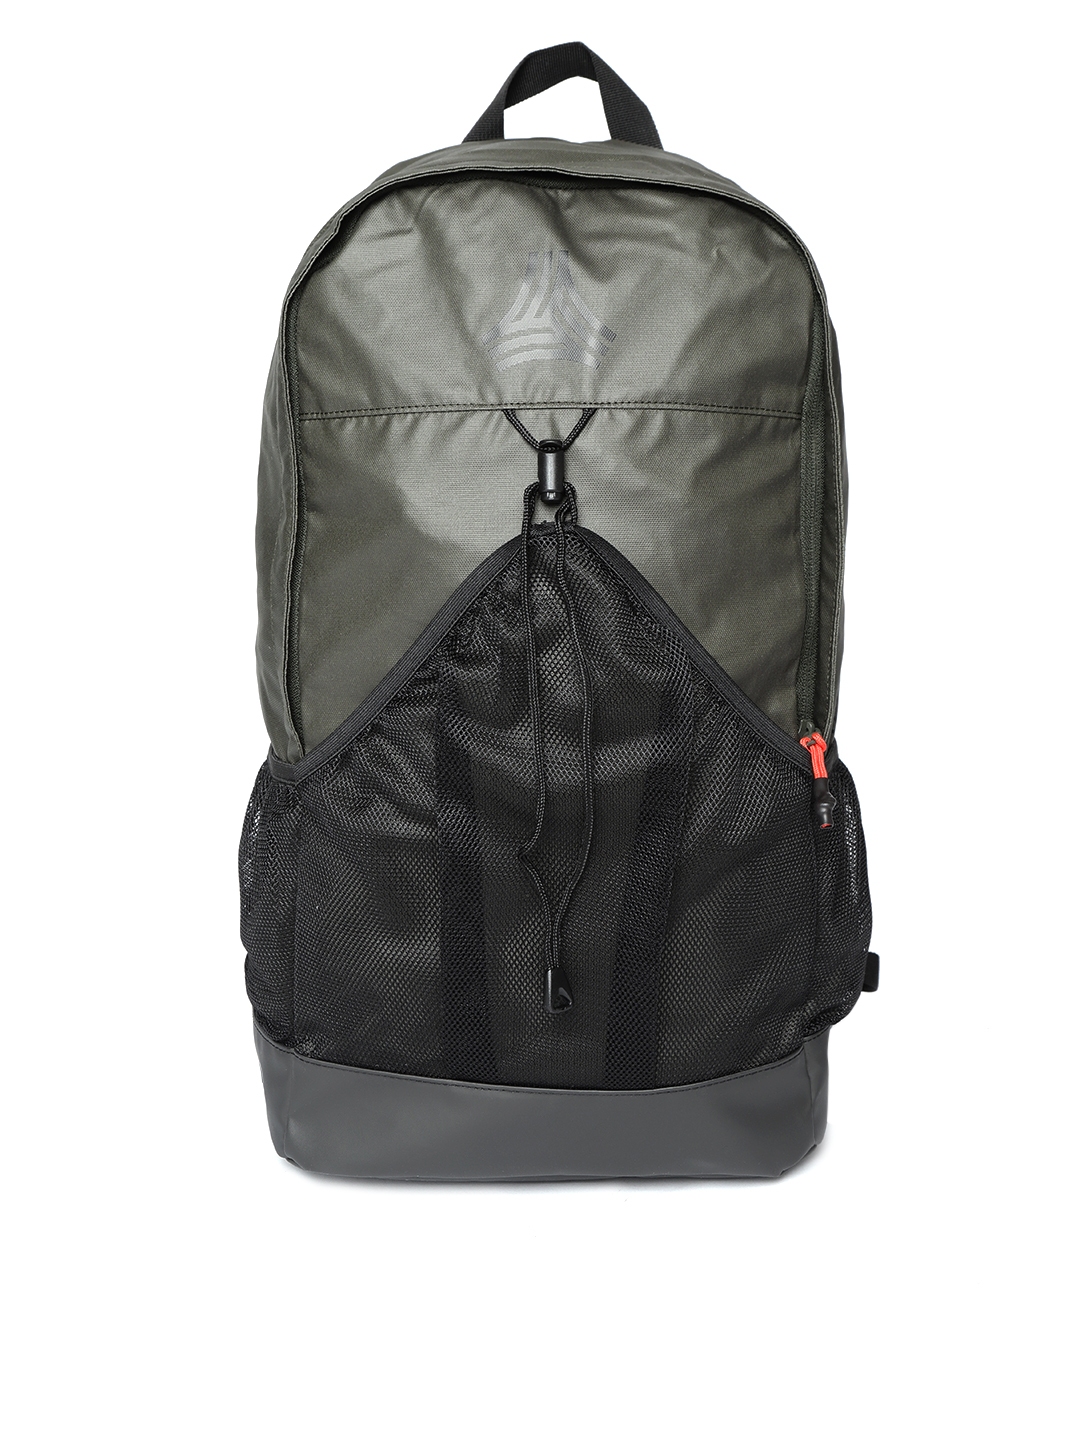 olive green adidas backpack